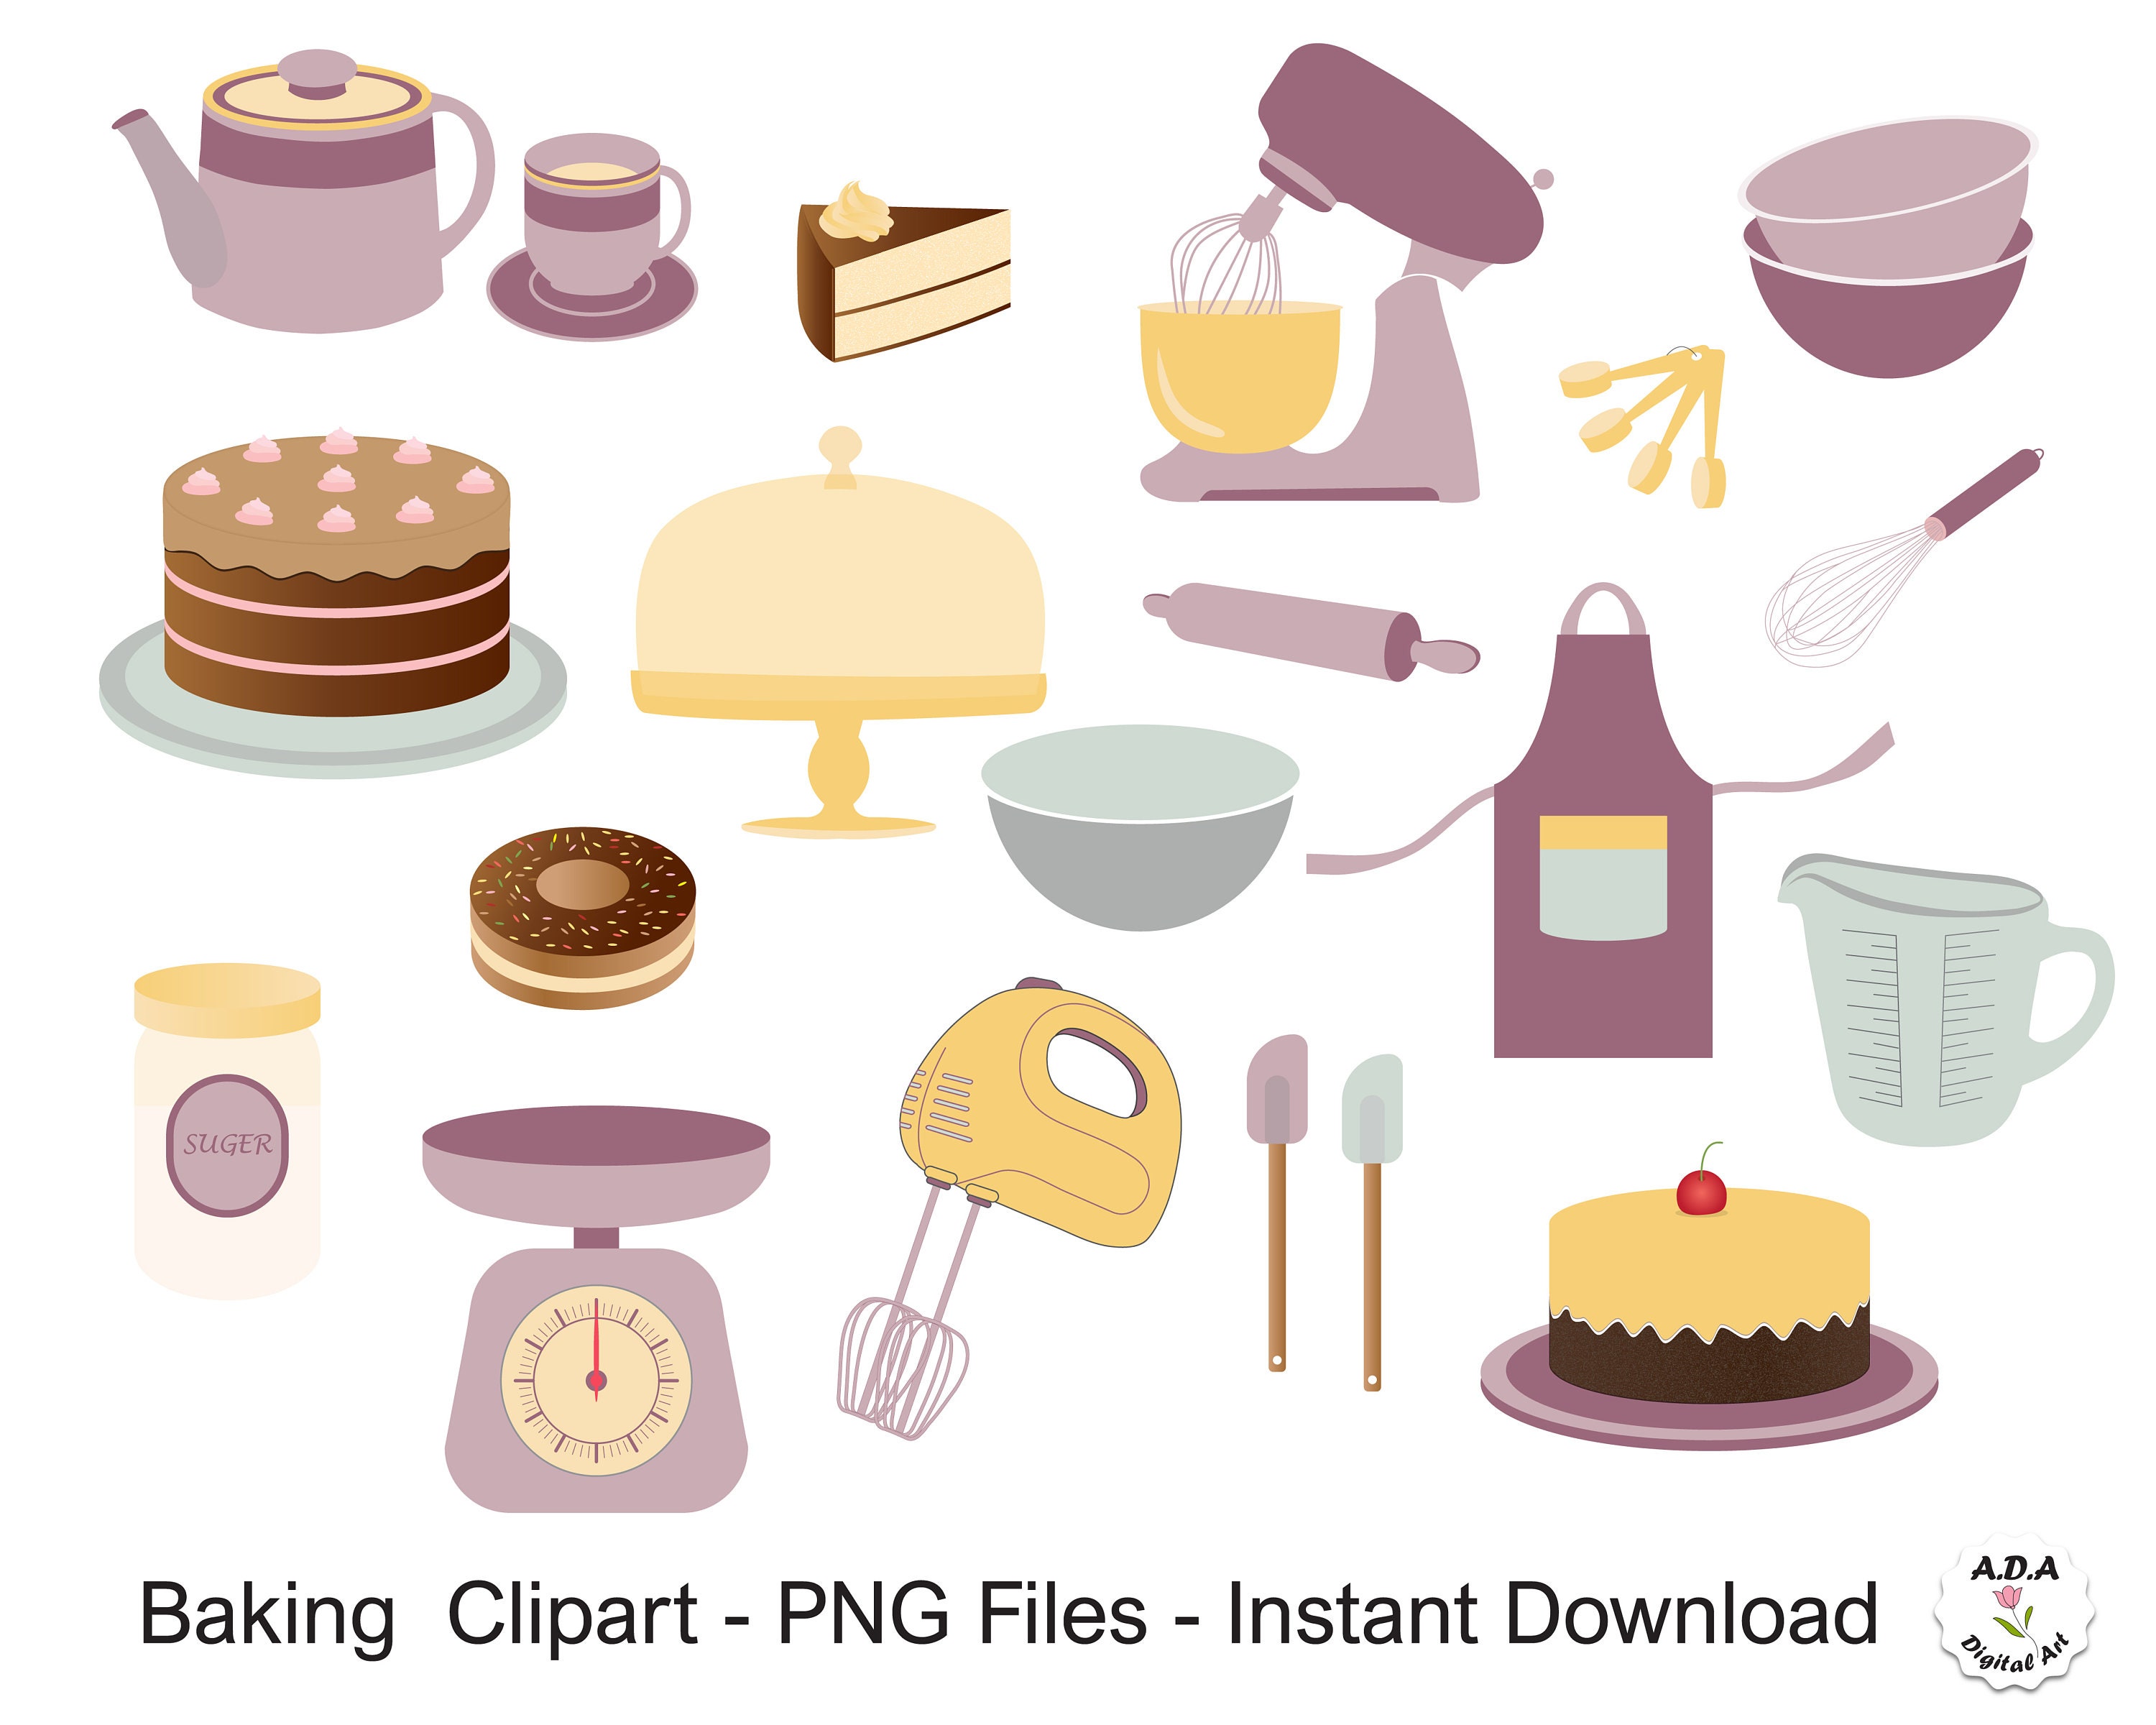 Kitchen Scale Clipart, Food Scale Clip Art Baking Kitchen Bakery Cooking  Measuring Weight Cute Digital Graphic Design Small Commercial Use 